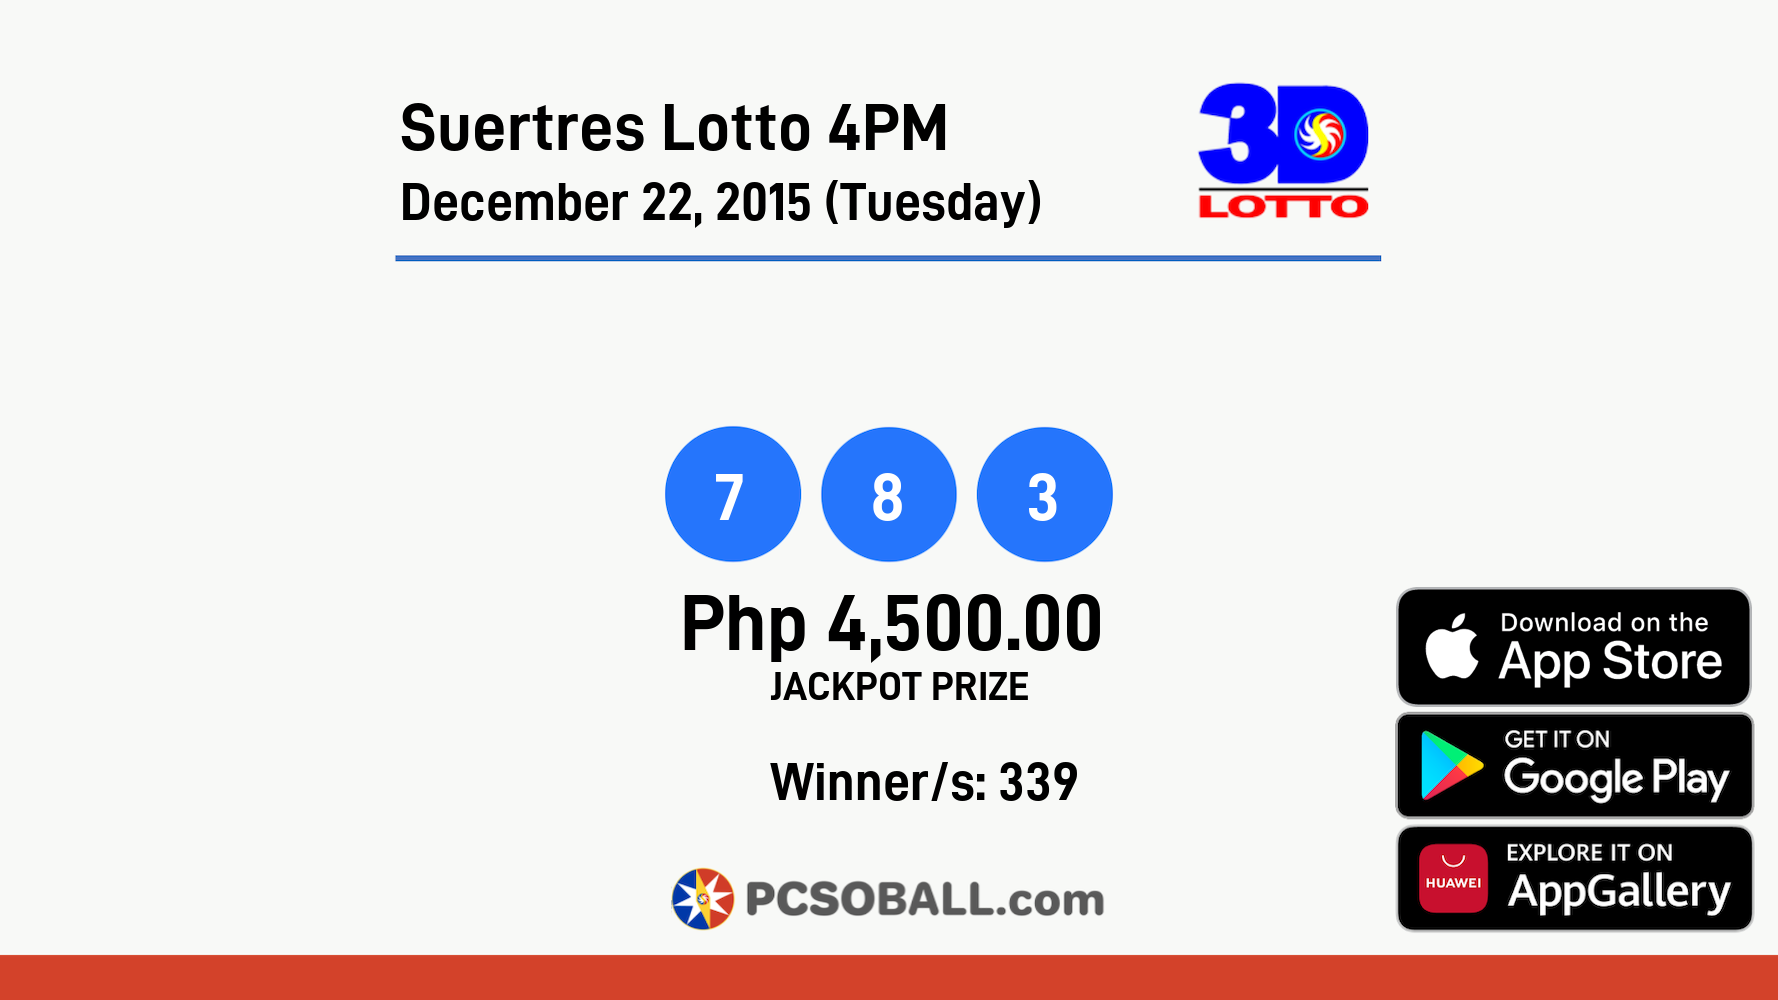 Suertres Lotto 4PM December 22, 2015 (Tuesday) Result